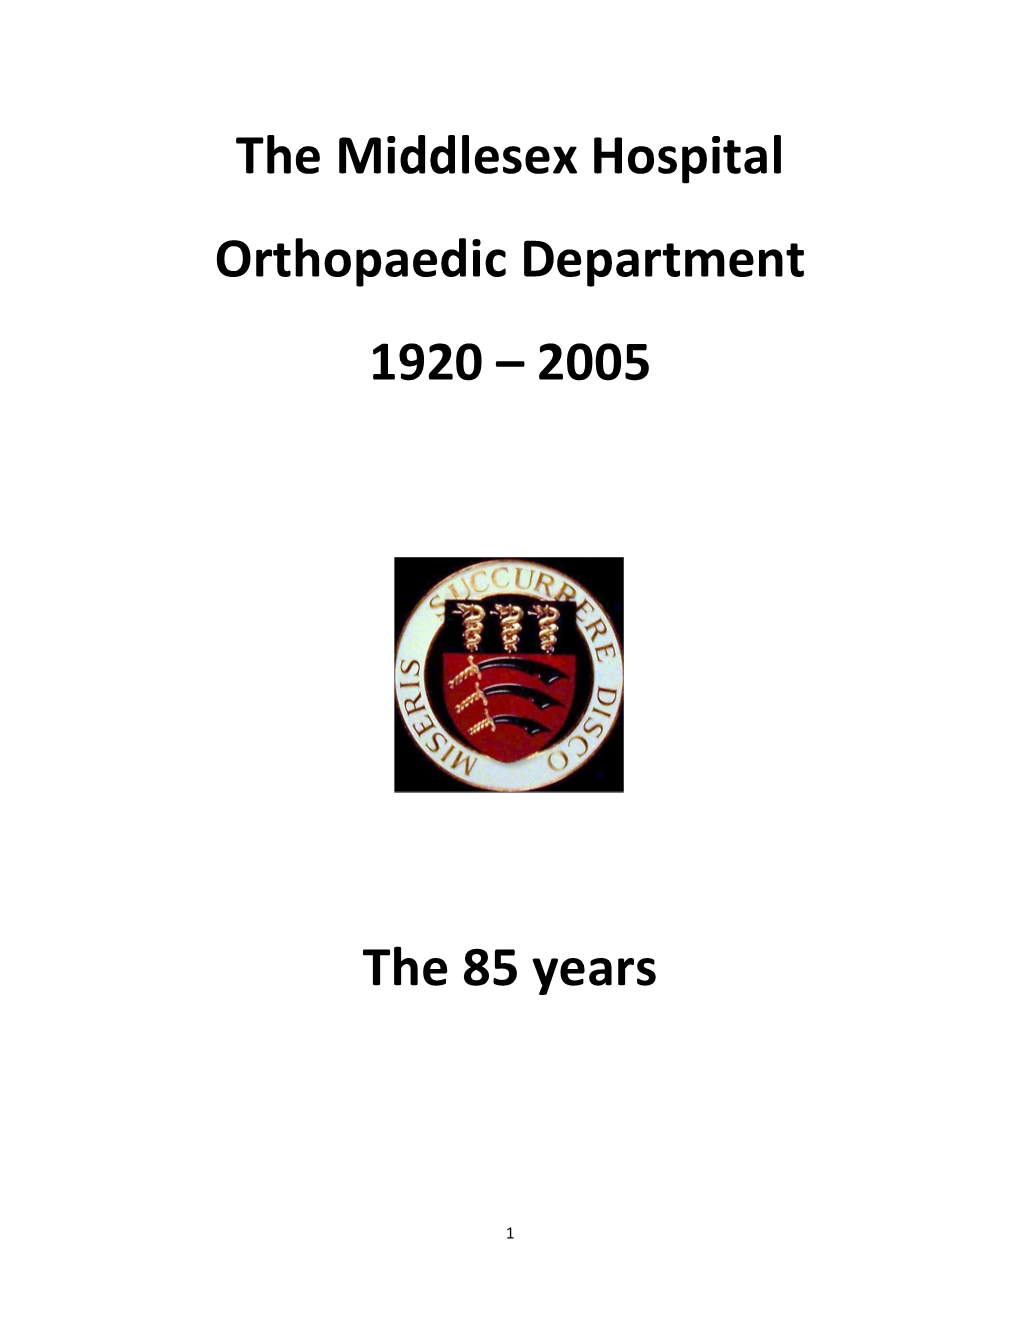 The Middlesex Orthopaedic Department 1920-2005